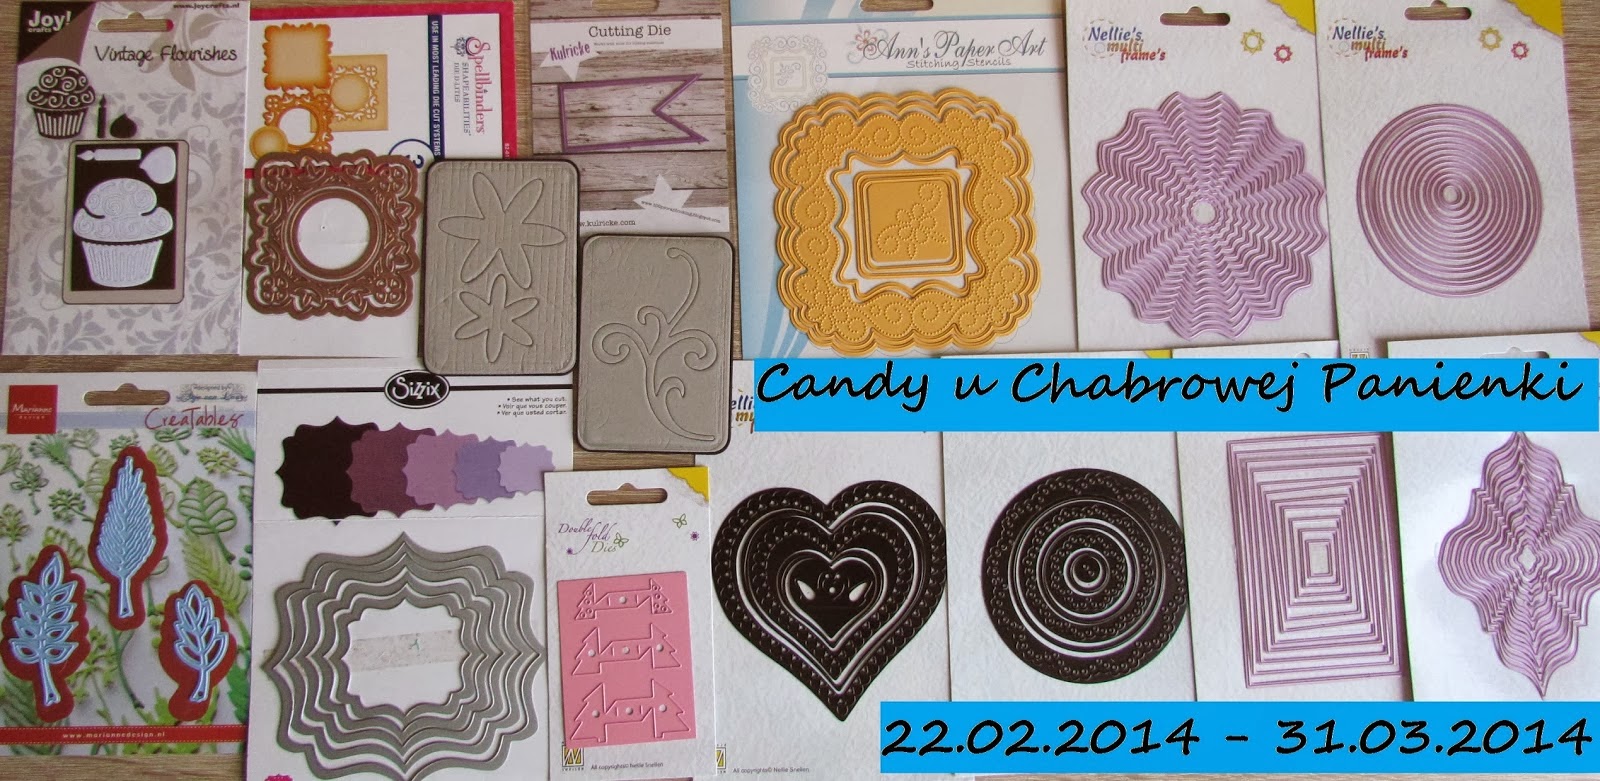 Candy do 31.03.2014